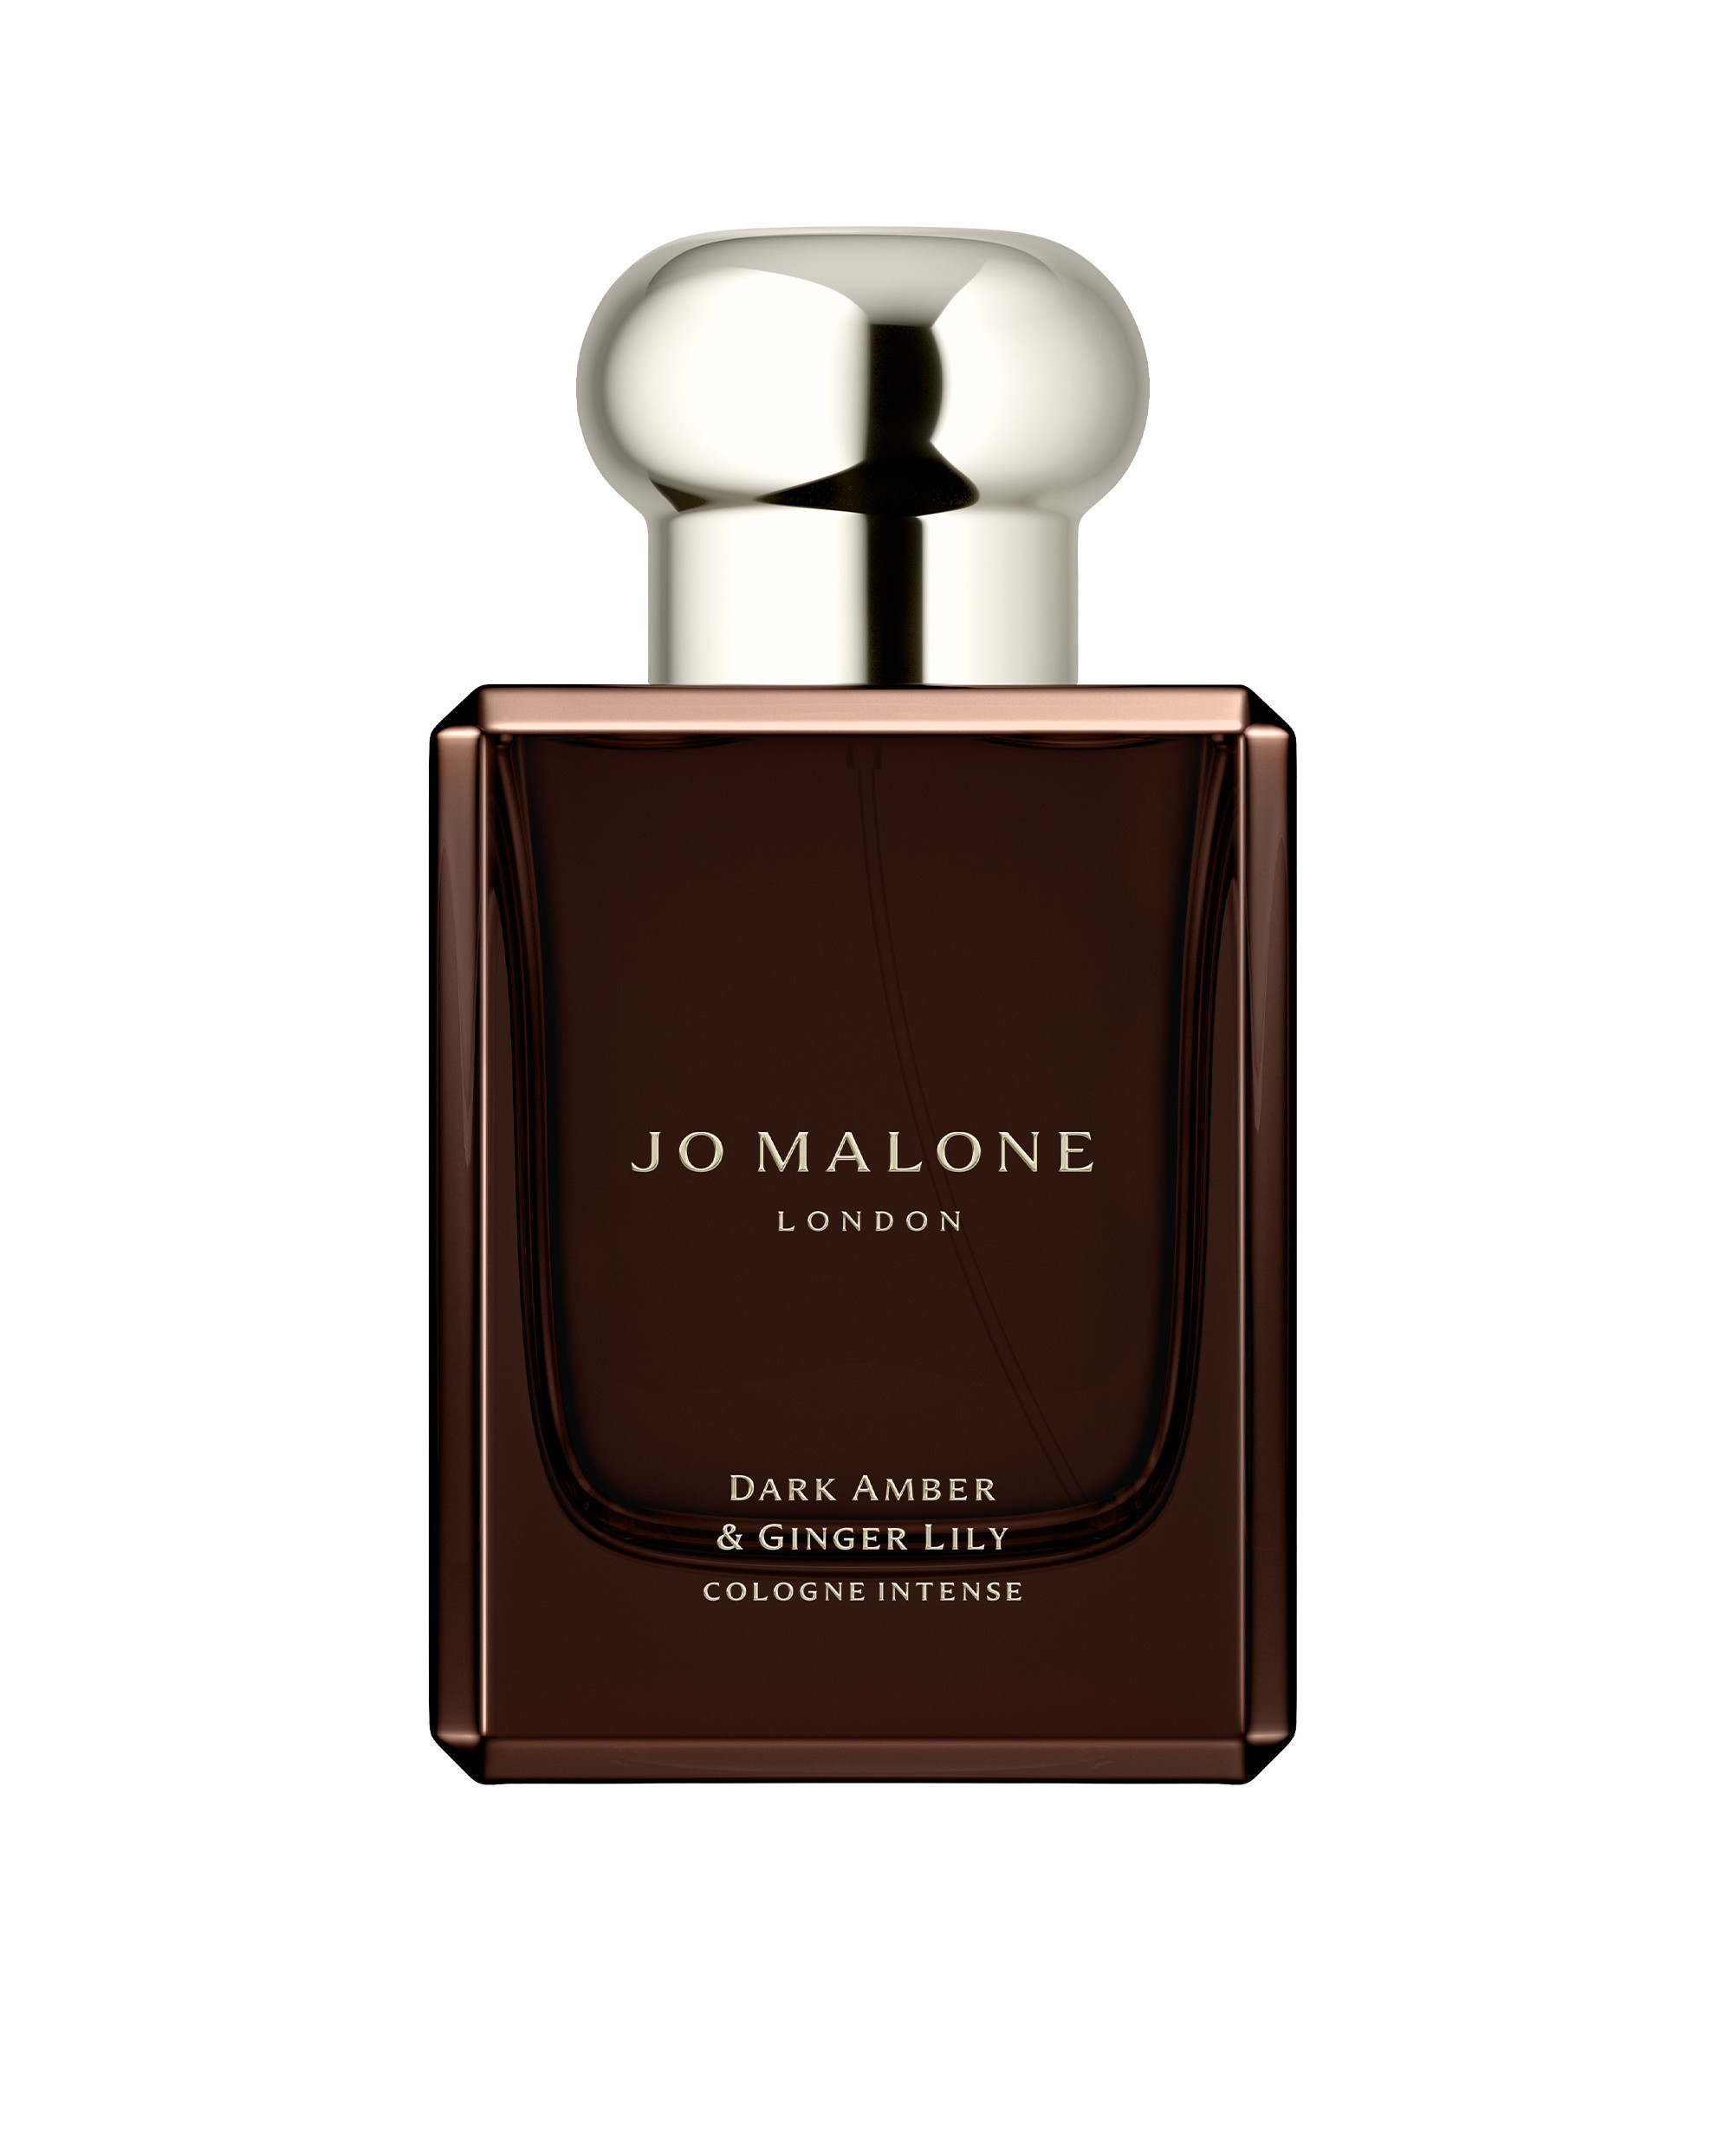 Jo Malone Dark Amber & Ginger Lily Cologne Intense 50 ml, Marrone, large image number 0